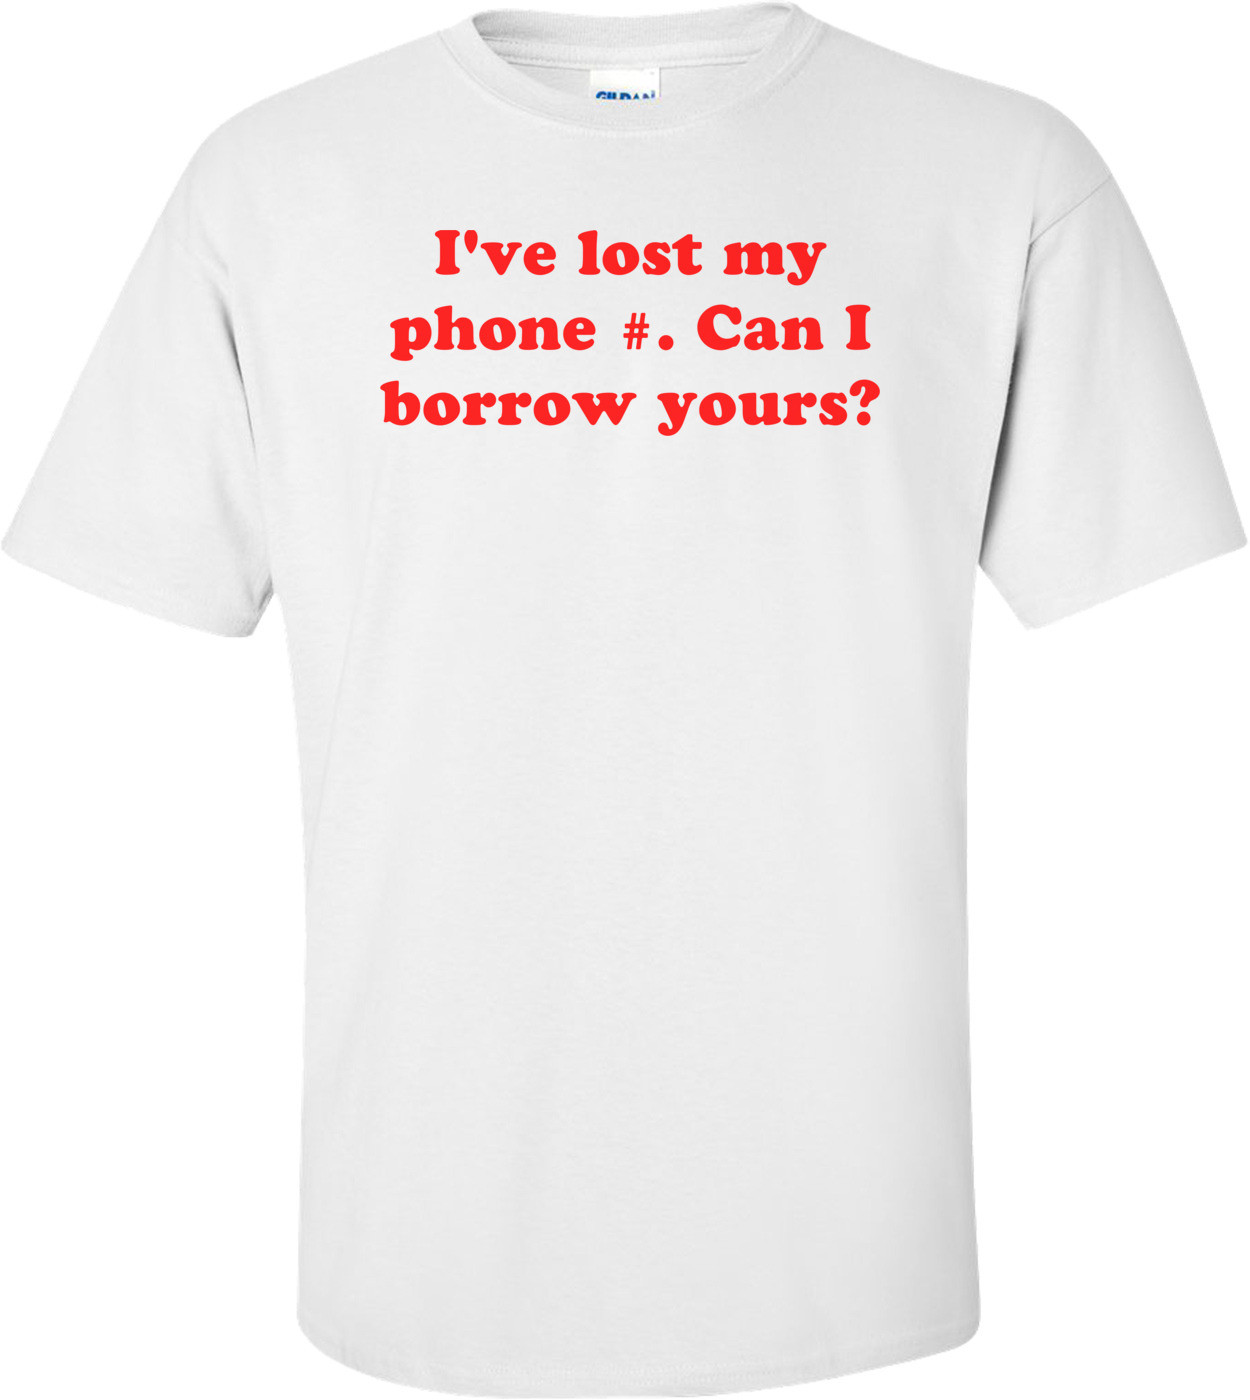 I've lost my phone #. Can I borrow yours?